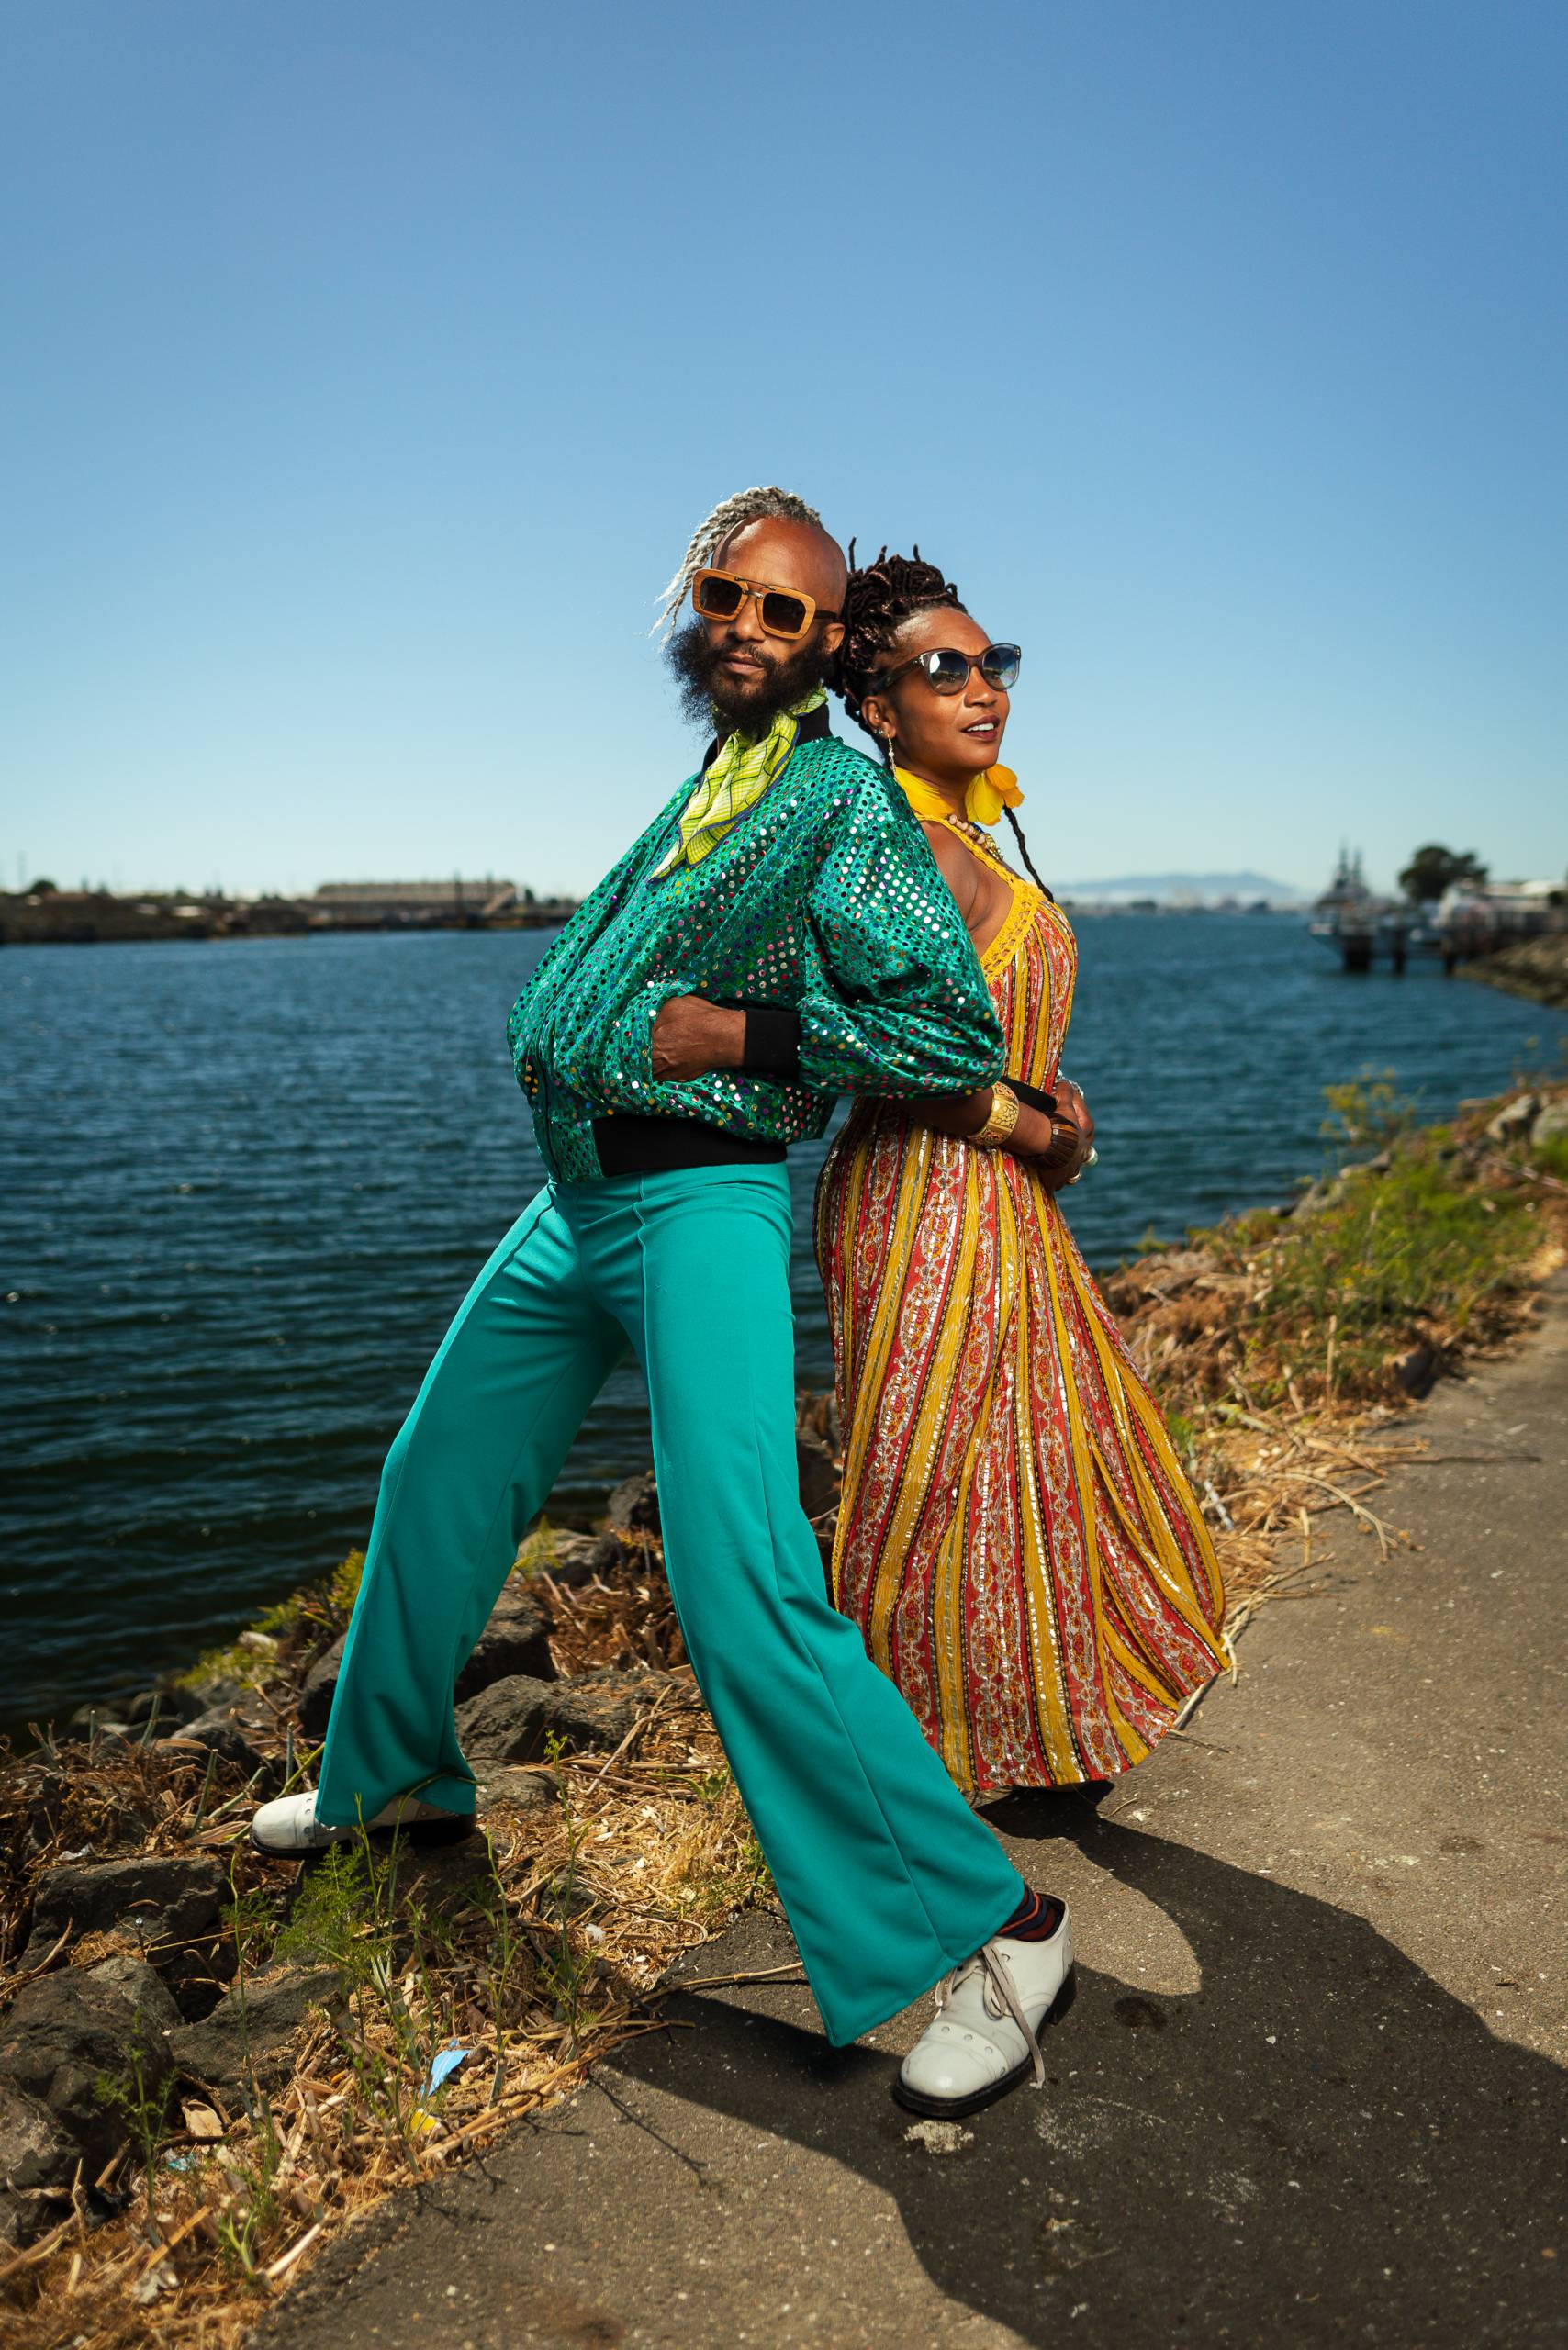 A man and a woman, brightly dressed and wearing sunglasses, stand back-to-back looking at the camera on a path beside a large body of water.